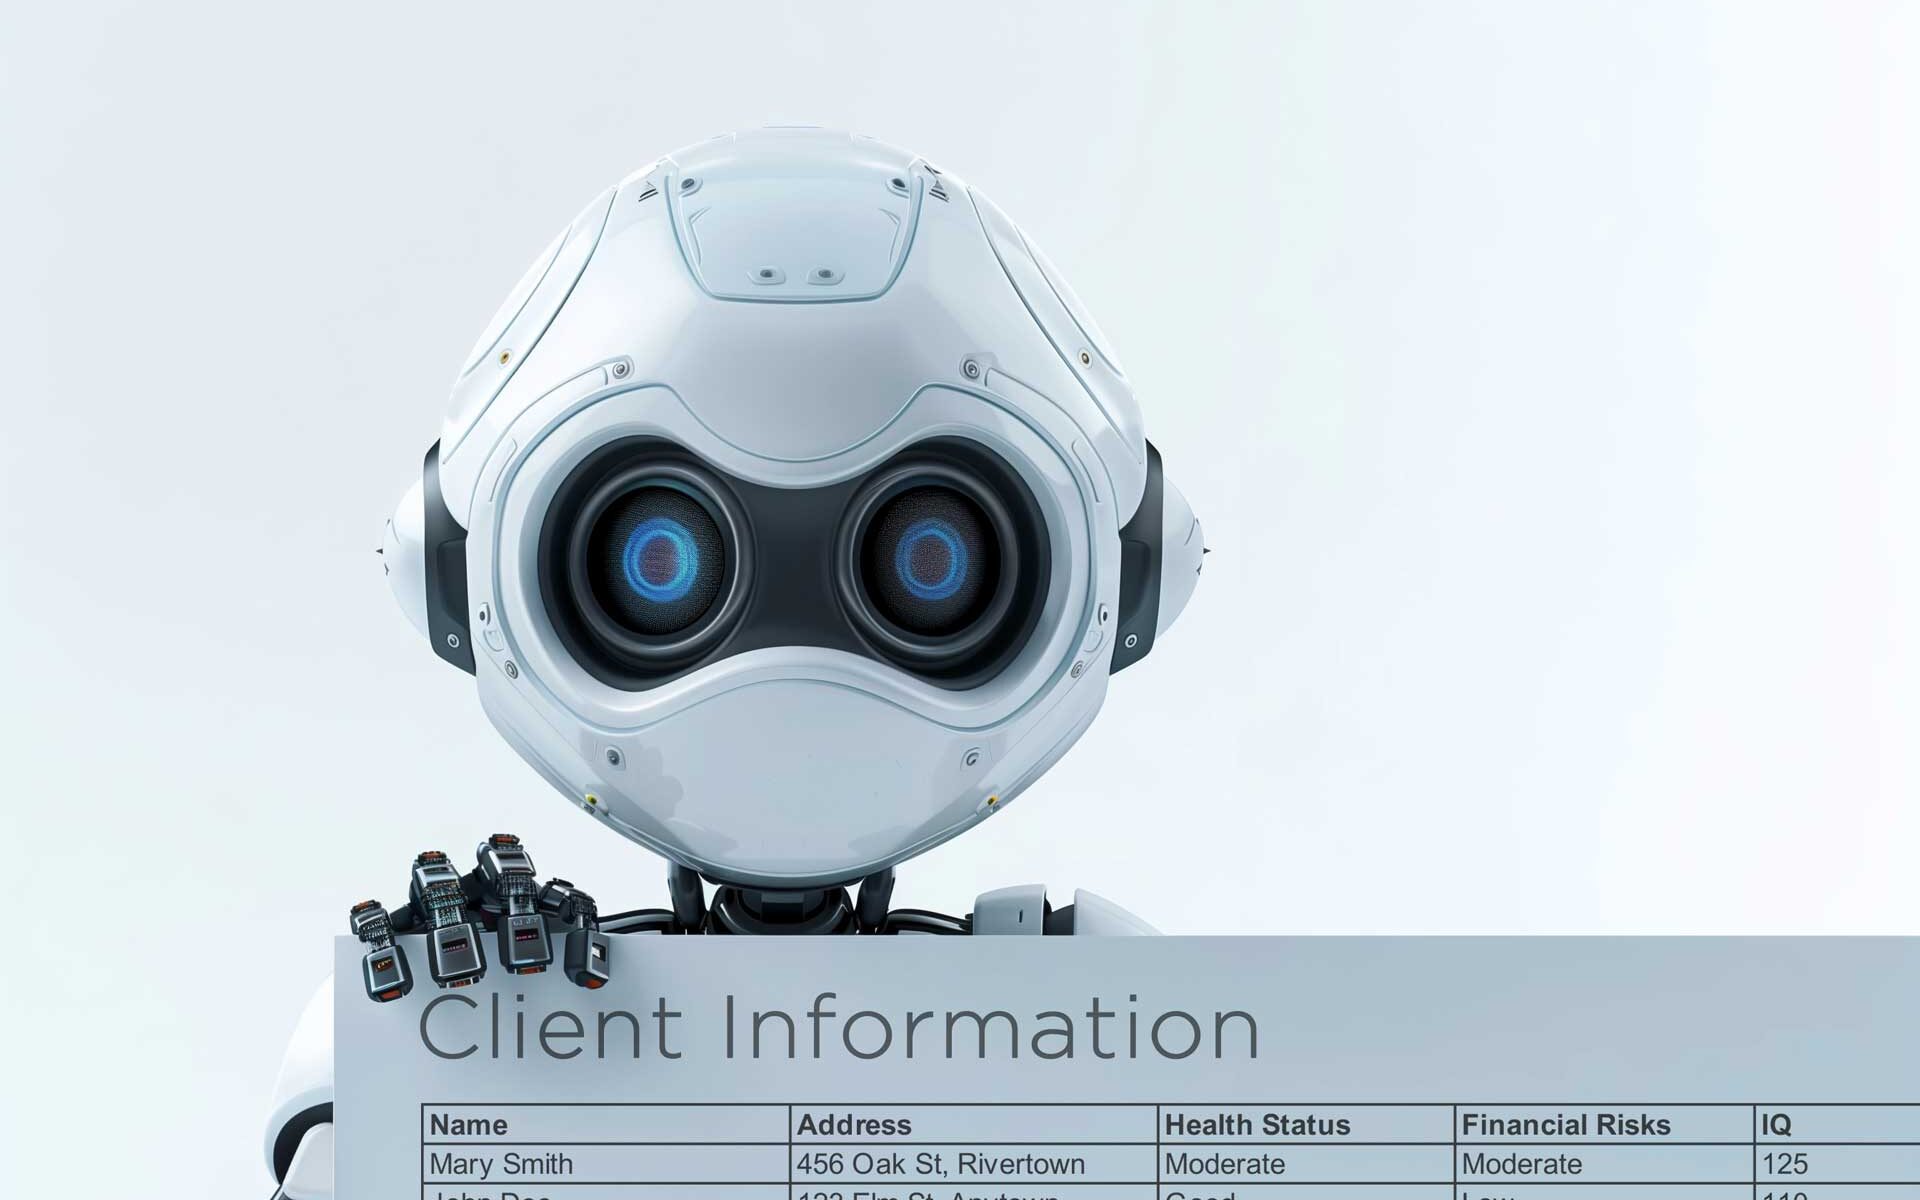 A futuristic robot with a humanoid face and multiple optical sensors holding a clipboard titled "Client Information," which lists the names, addresses, health statuses, financial risks, and IQ scores of two individuals.